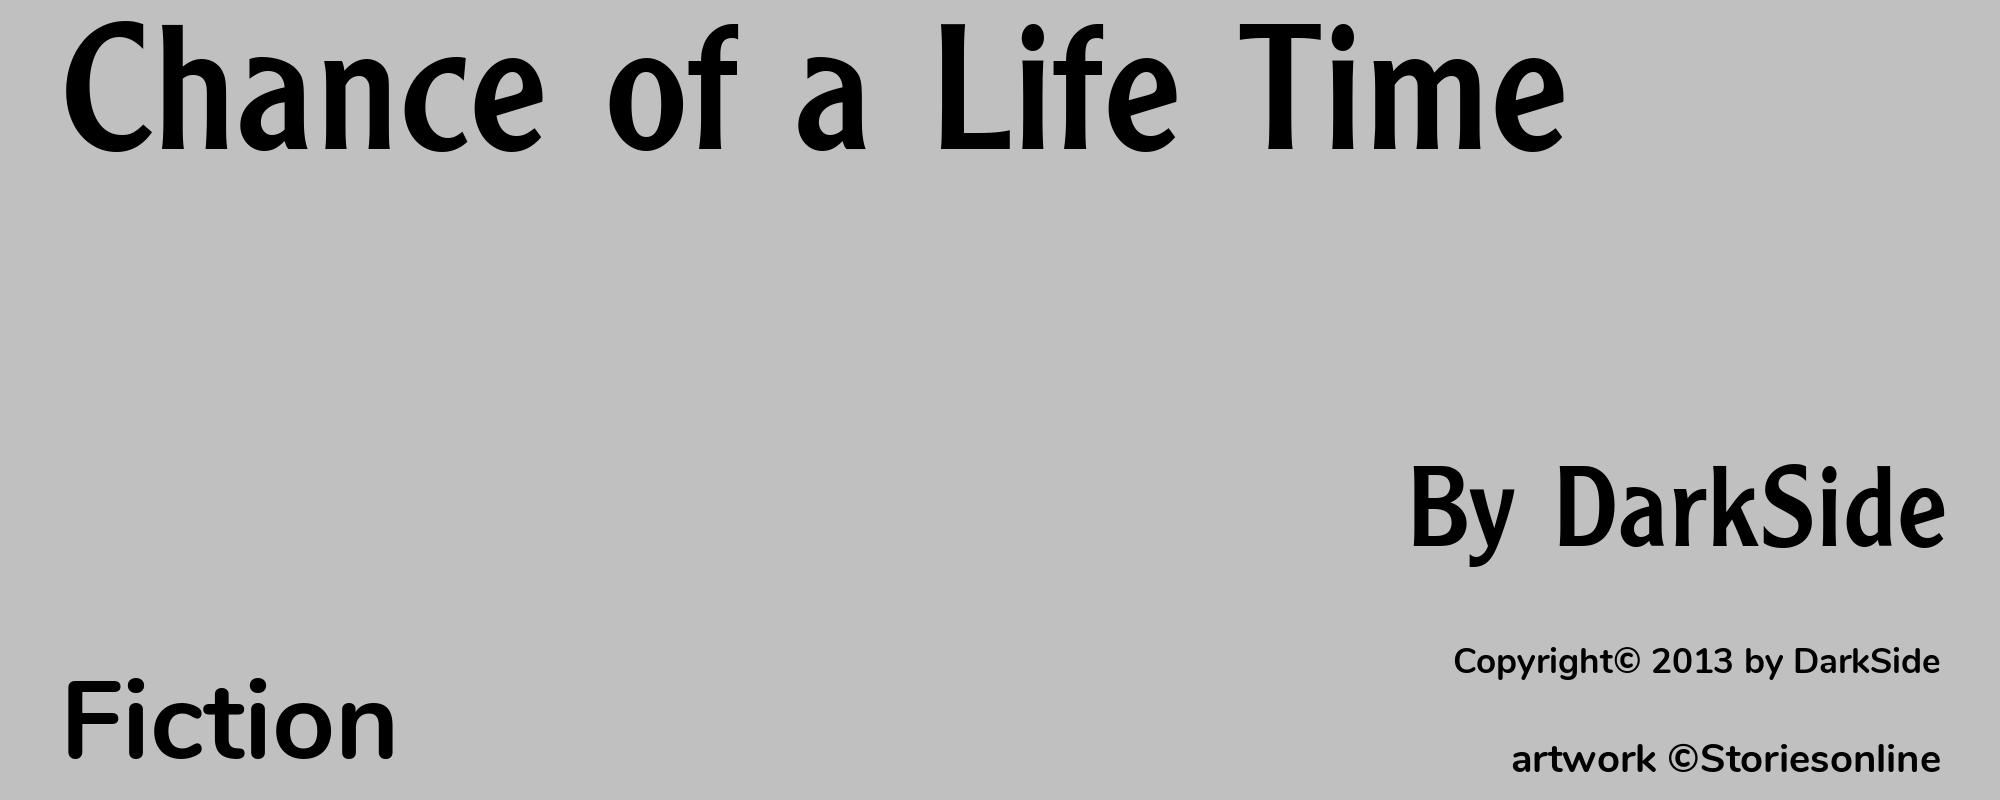 Chance of a Life Time - Cover